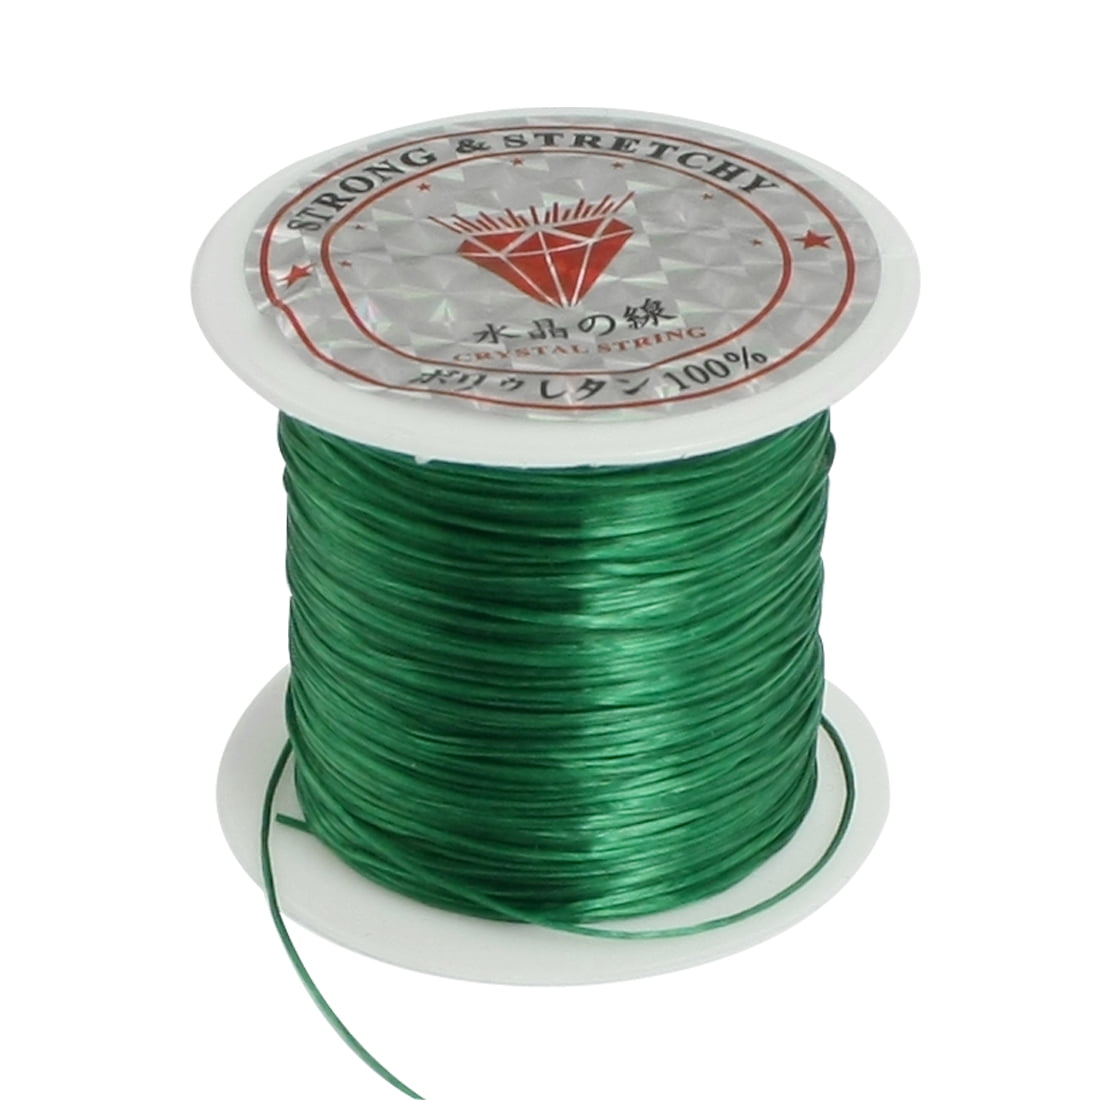 Lacing Cord & Needle 82ft.for Sun Screen Easy Installation Strong Durable Cord 